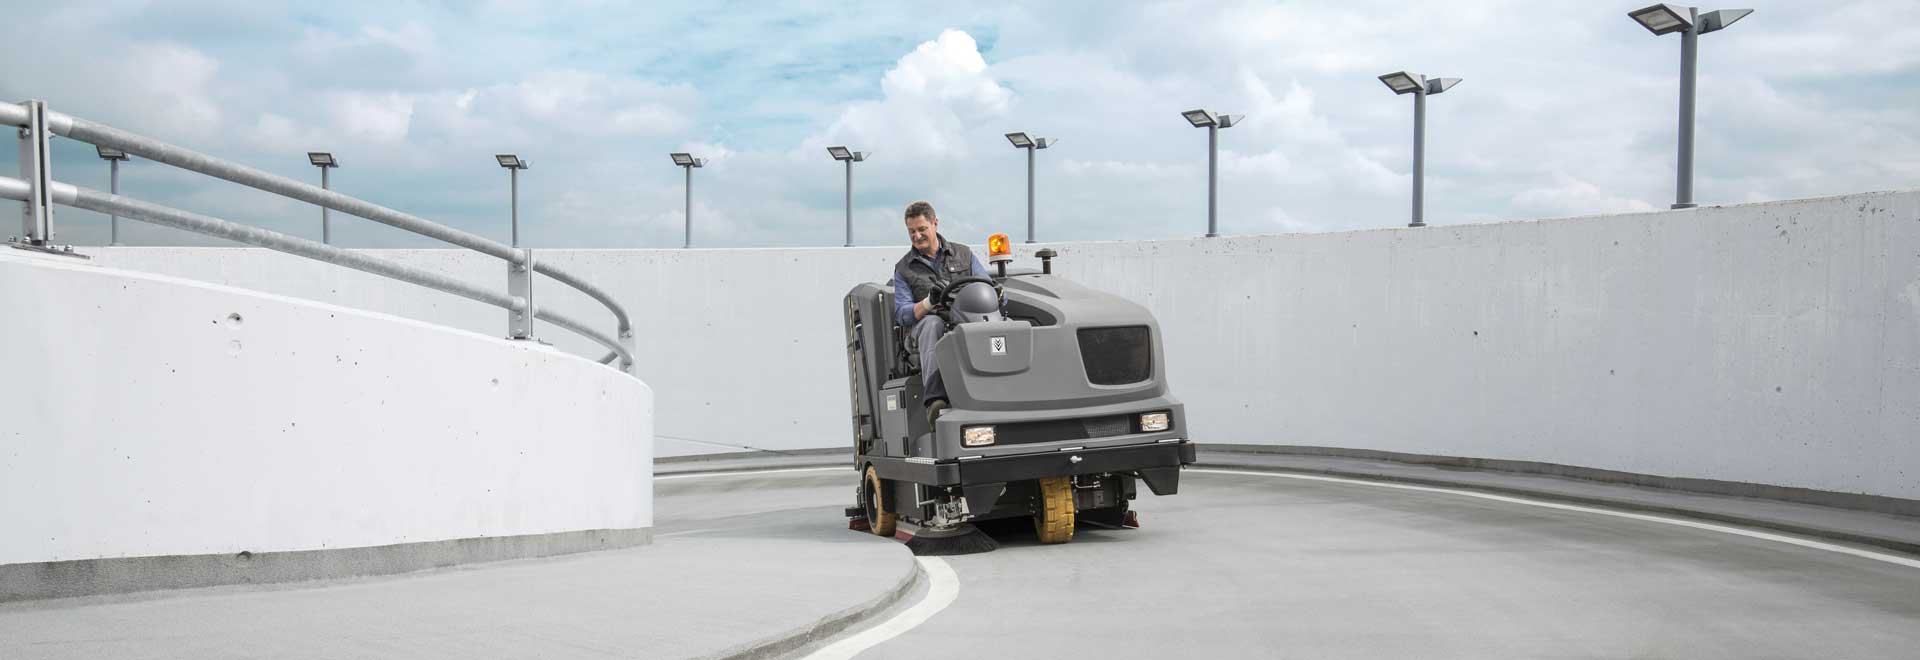 Ride on sweeper cleaning tarmac